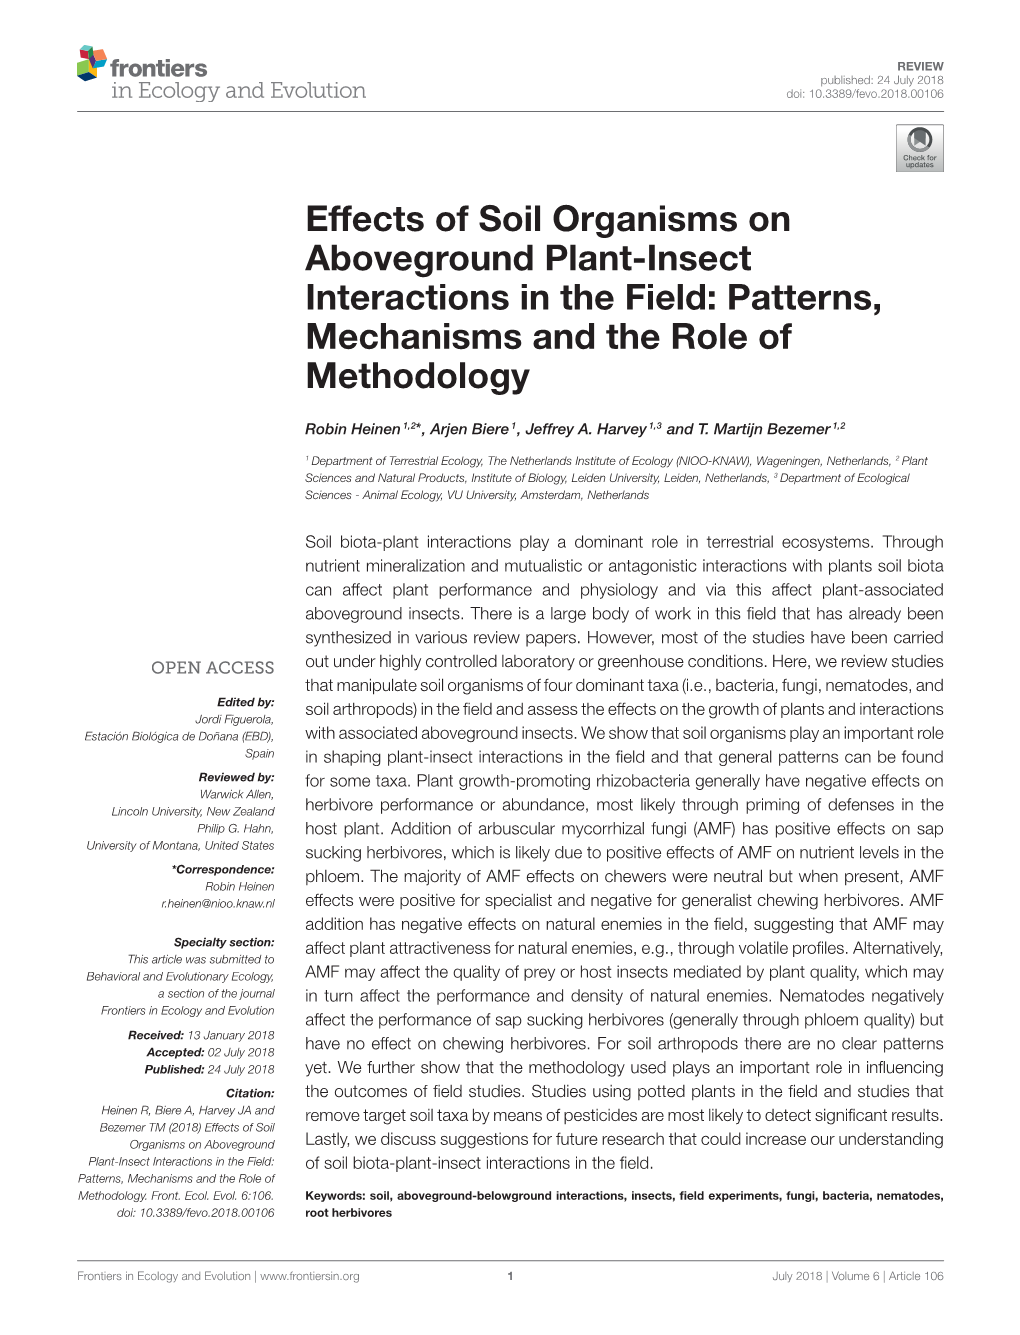 Effects of Soil Organisms on Aboveground Plant-Insect Interactions in the Field: Patterns, Mechanisms and the Role of Methodology